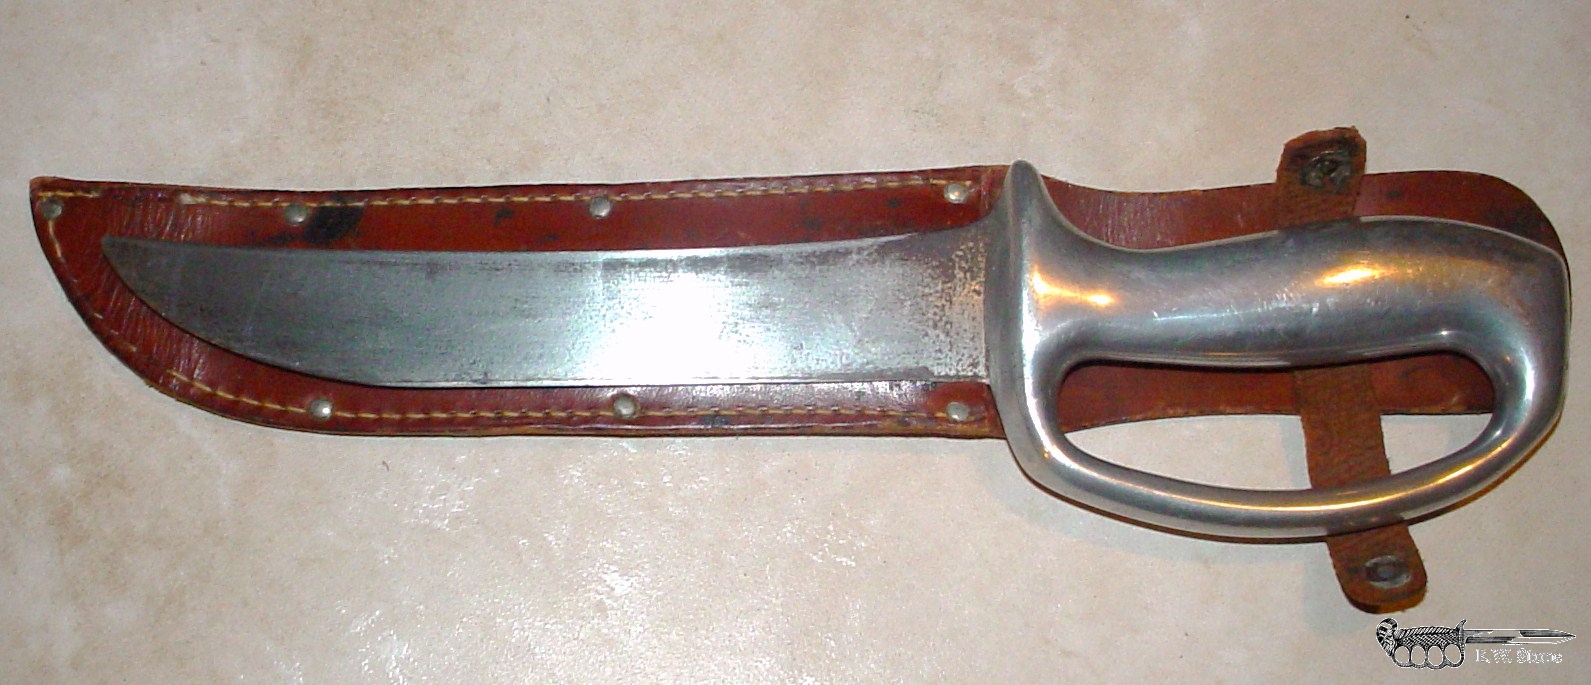 Unknown & Unmarked US Knuckle Knife, Robbins of Dudley Style